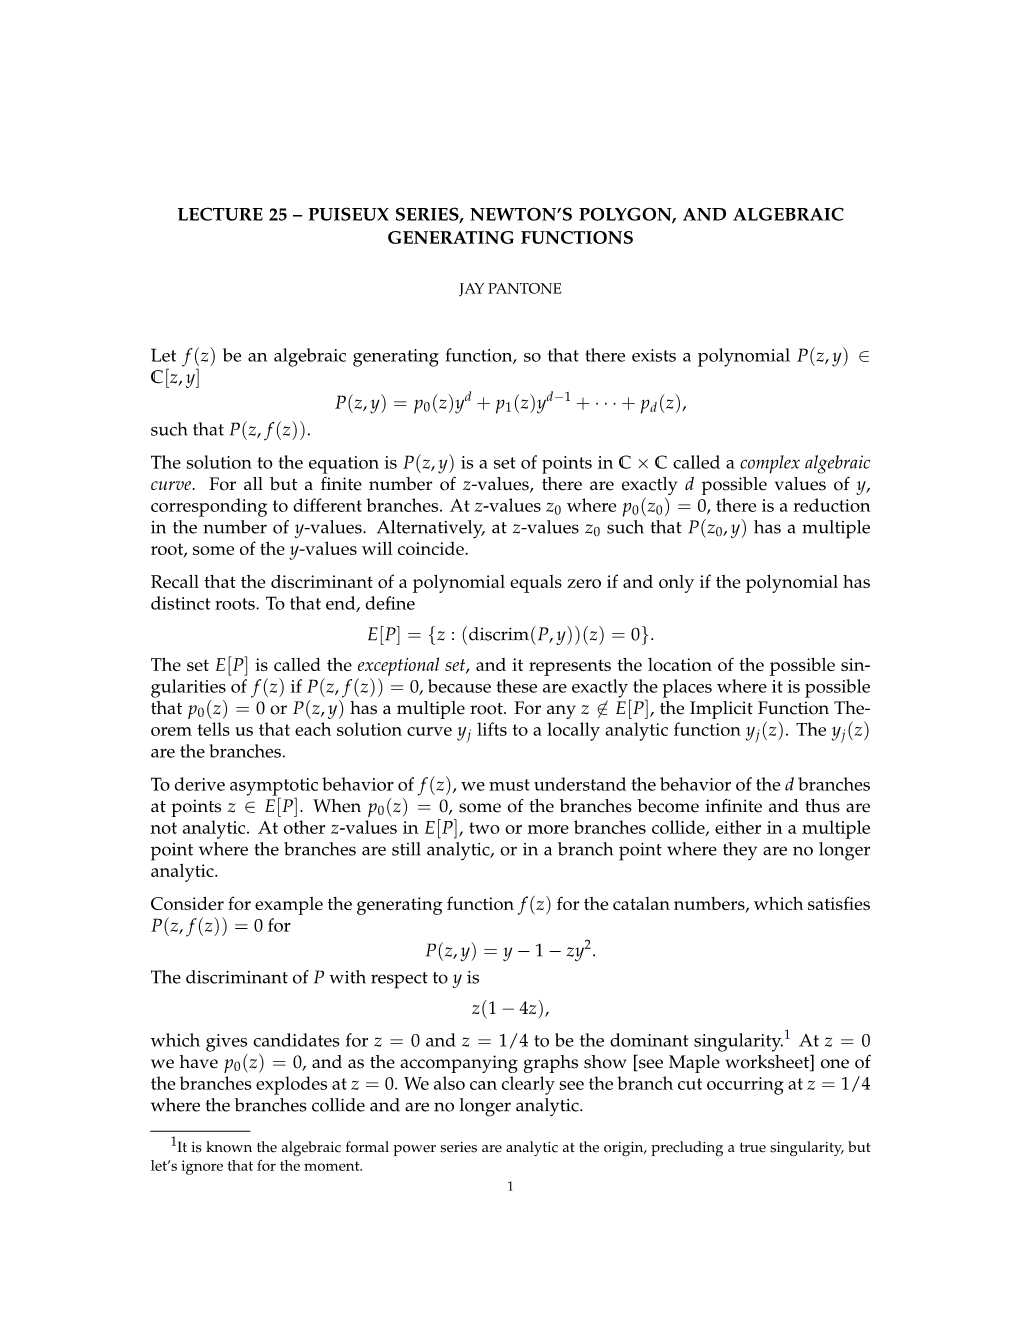 Puiseux Series, Newton's Polygons, and Algebraic